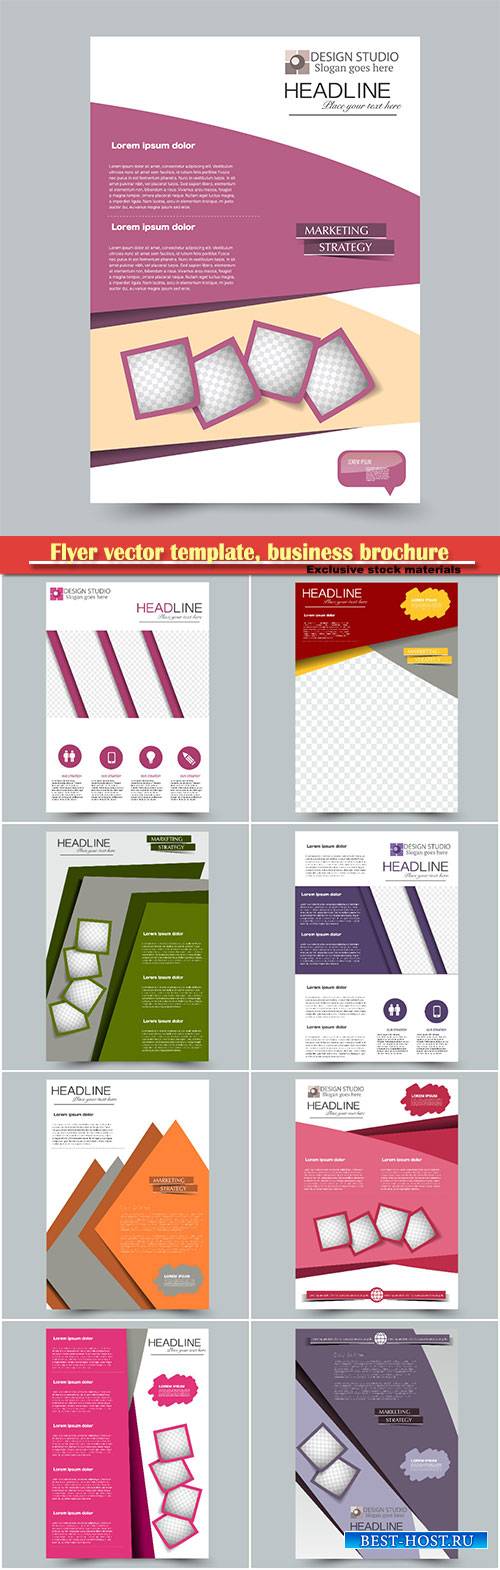 Flyer vector template, business brochure, magazine cover # 37